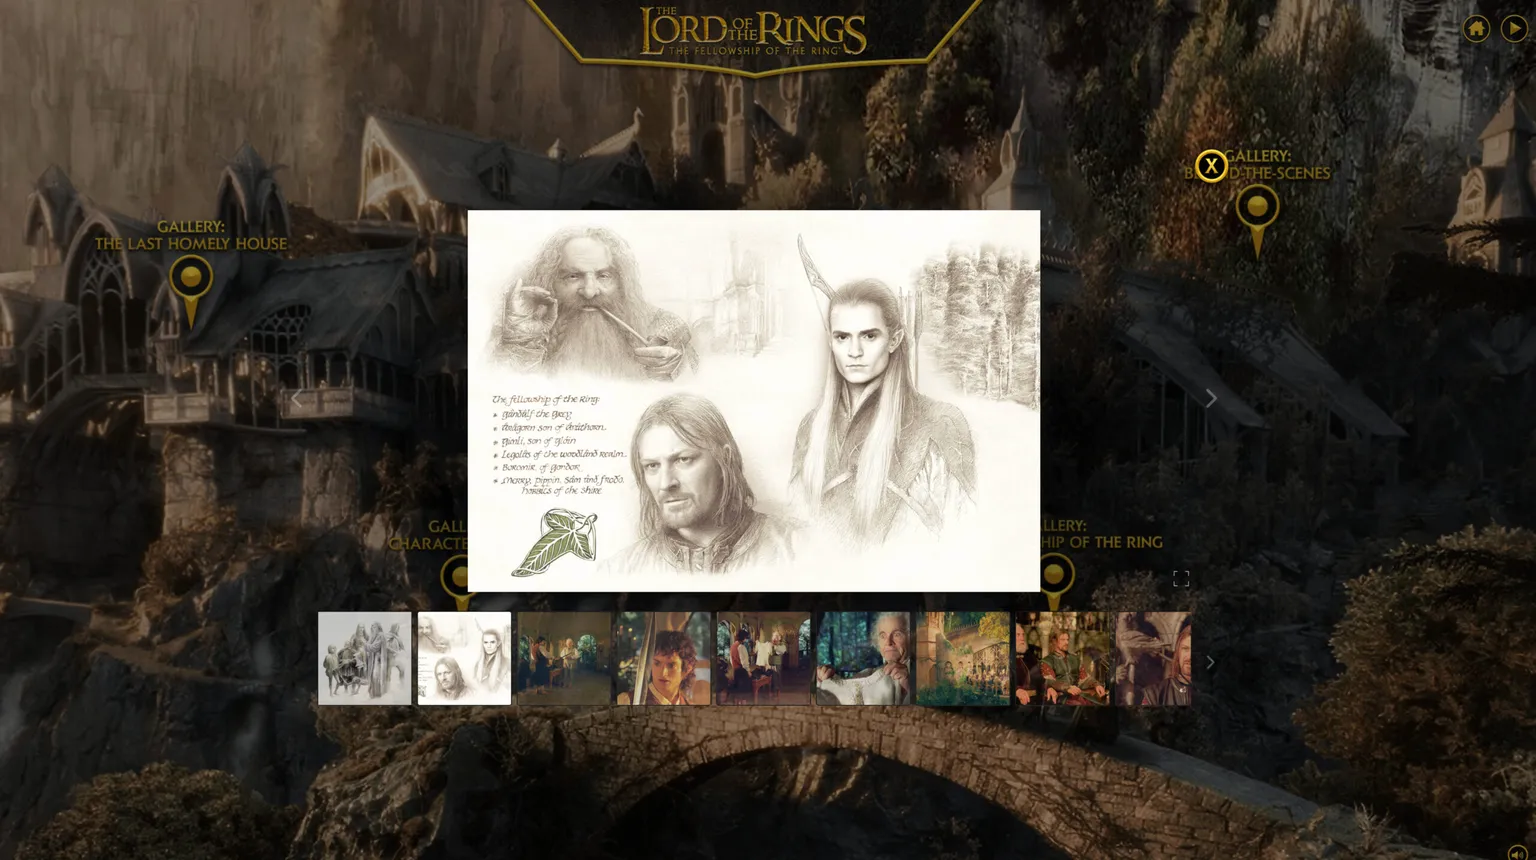 Image of photo gallery showing Lord of the Rings film photos and illustrated content.